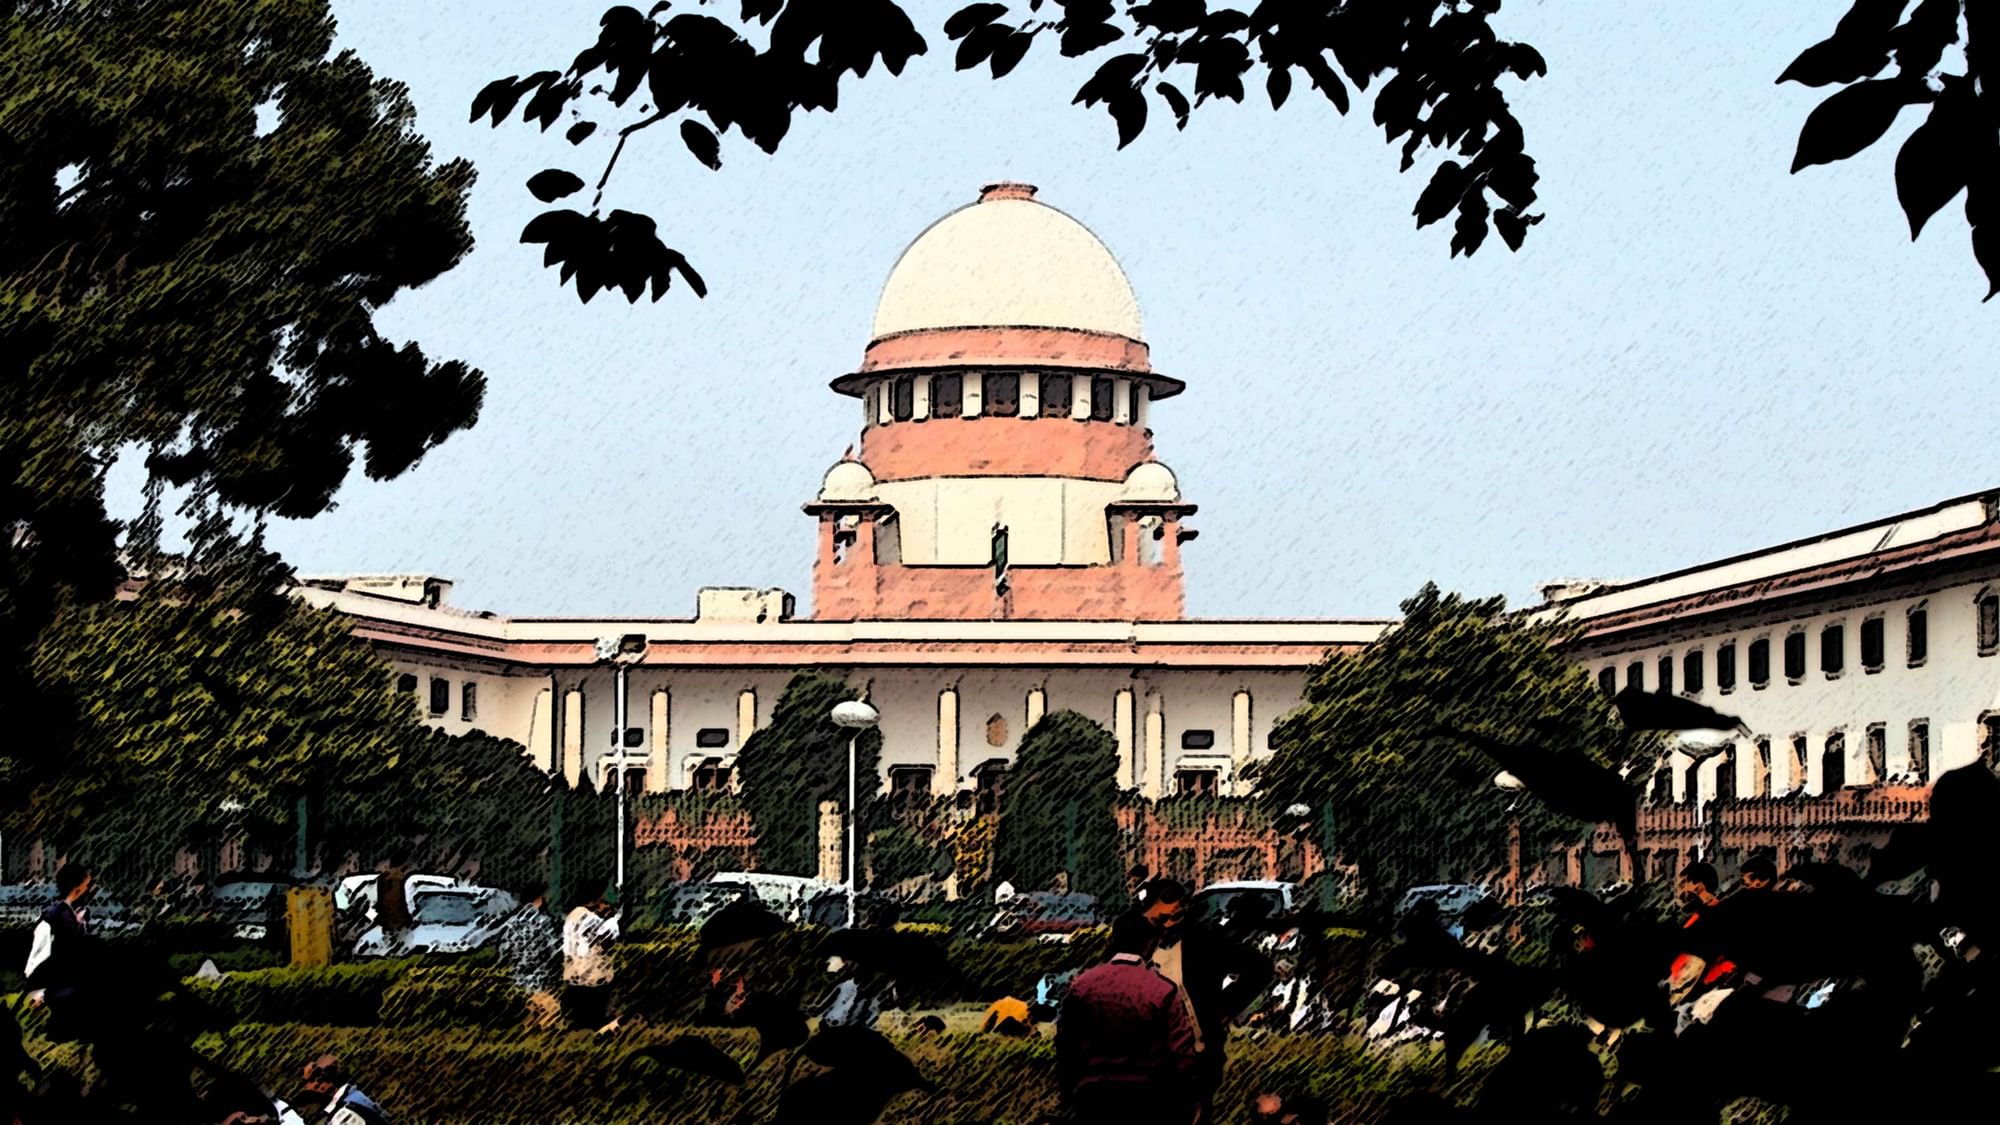 The Supreme Court of India.